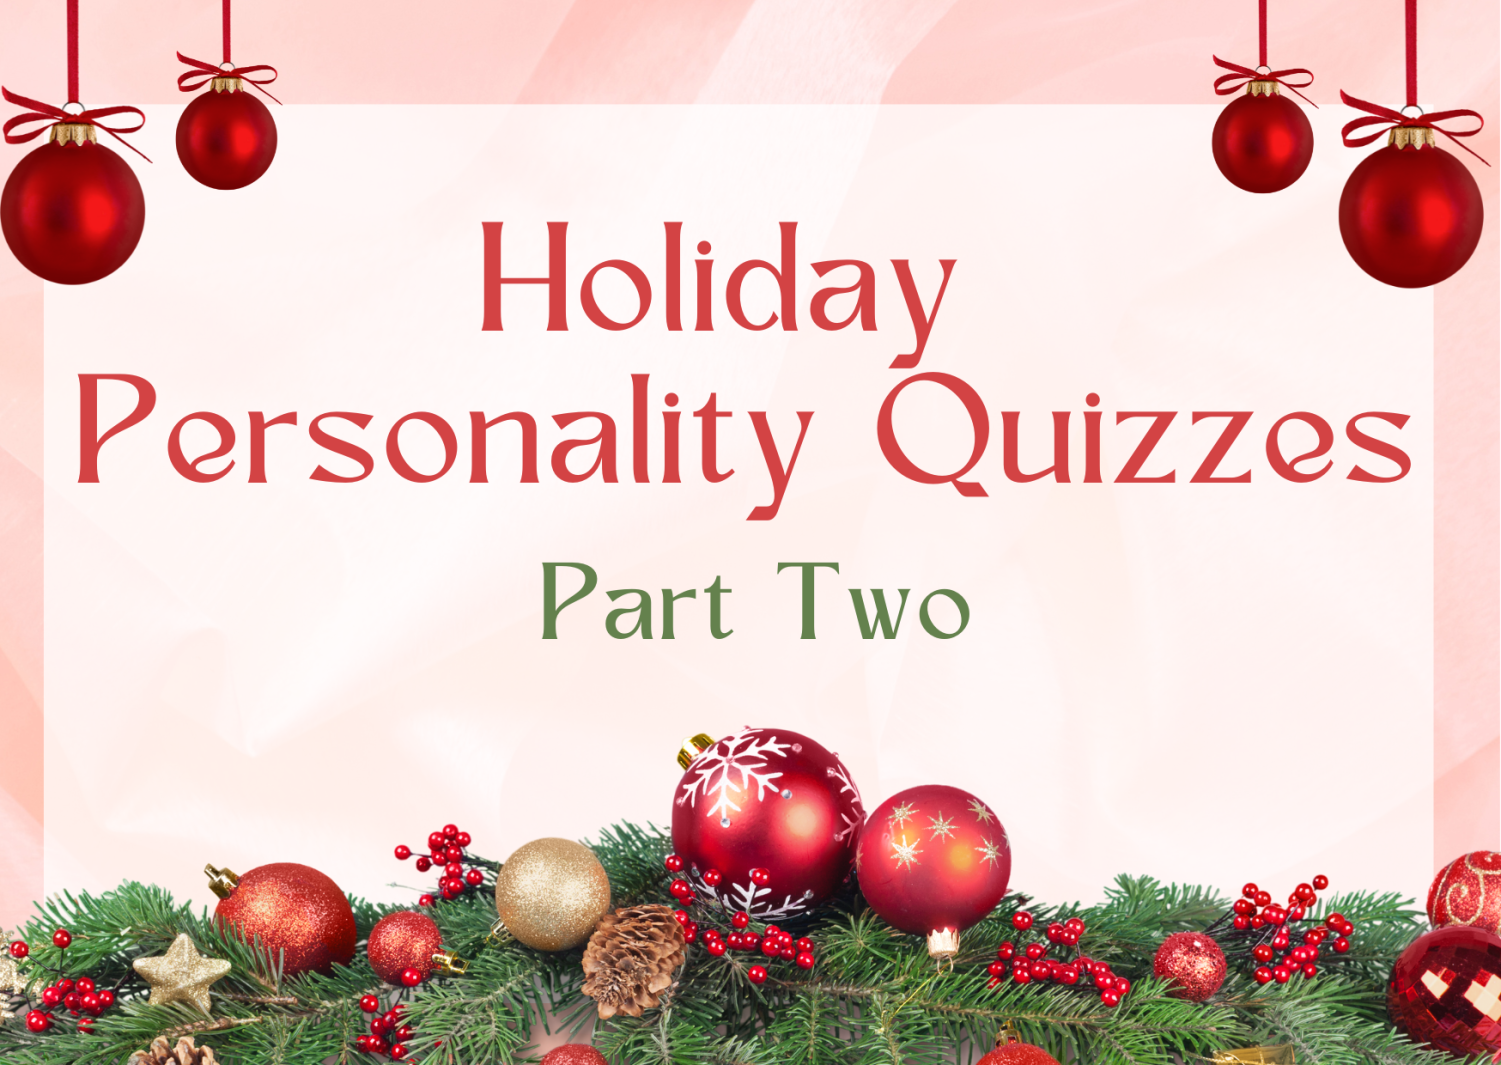 Personality quizzes: holidays, part two – The Howler